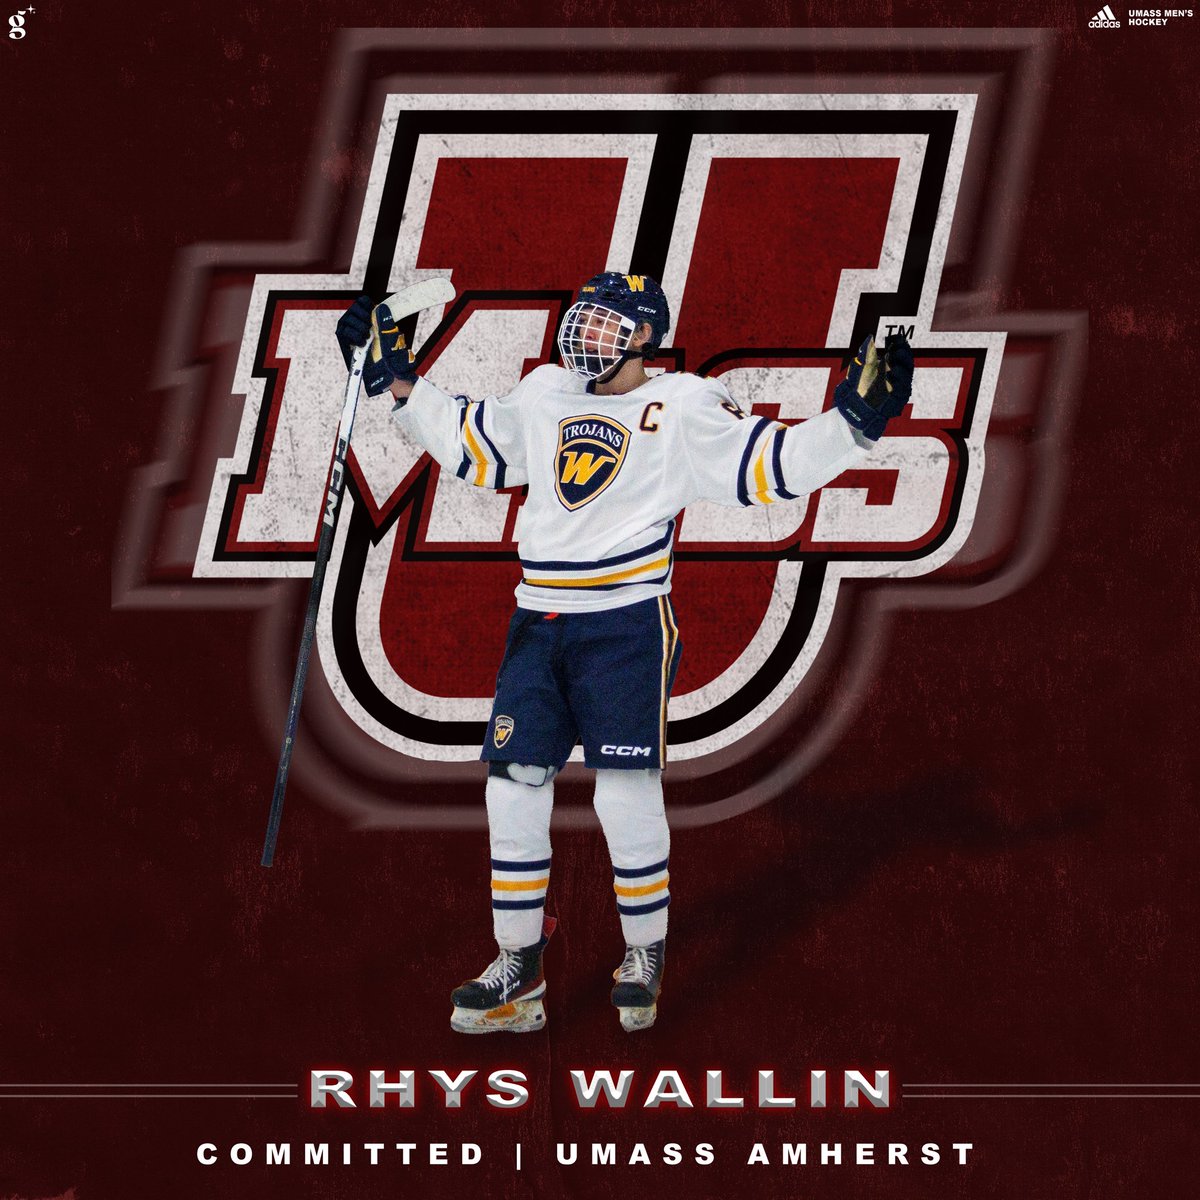 I am beyond proud and honored to announce my commitment to further my education and play Division 1 hockey at the University of Massachusetts! I would like to give a huge thanks to all my teammates, coaches, friends and family who have helped me along the way ! #gominutemen